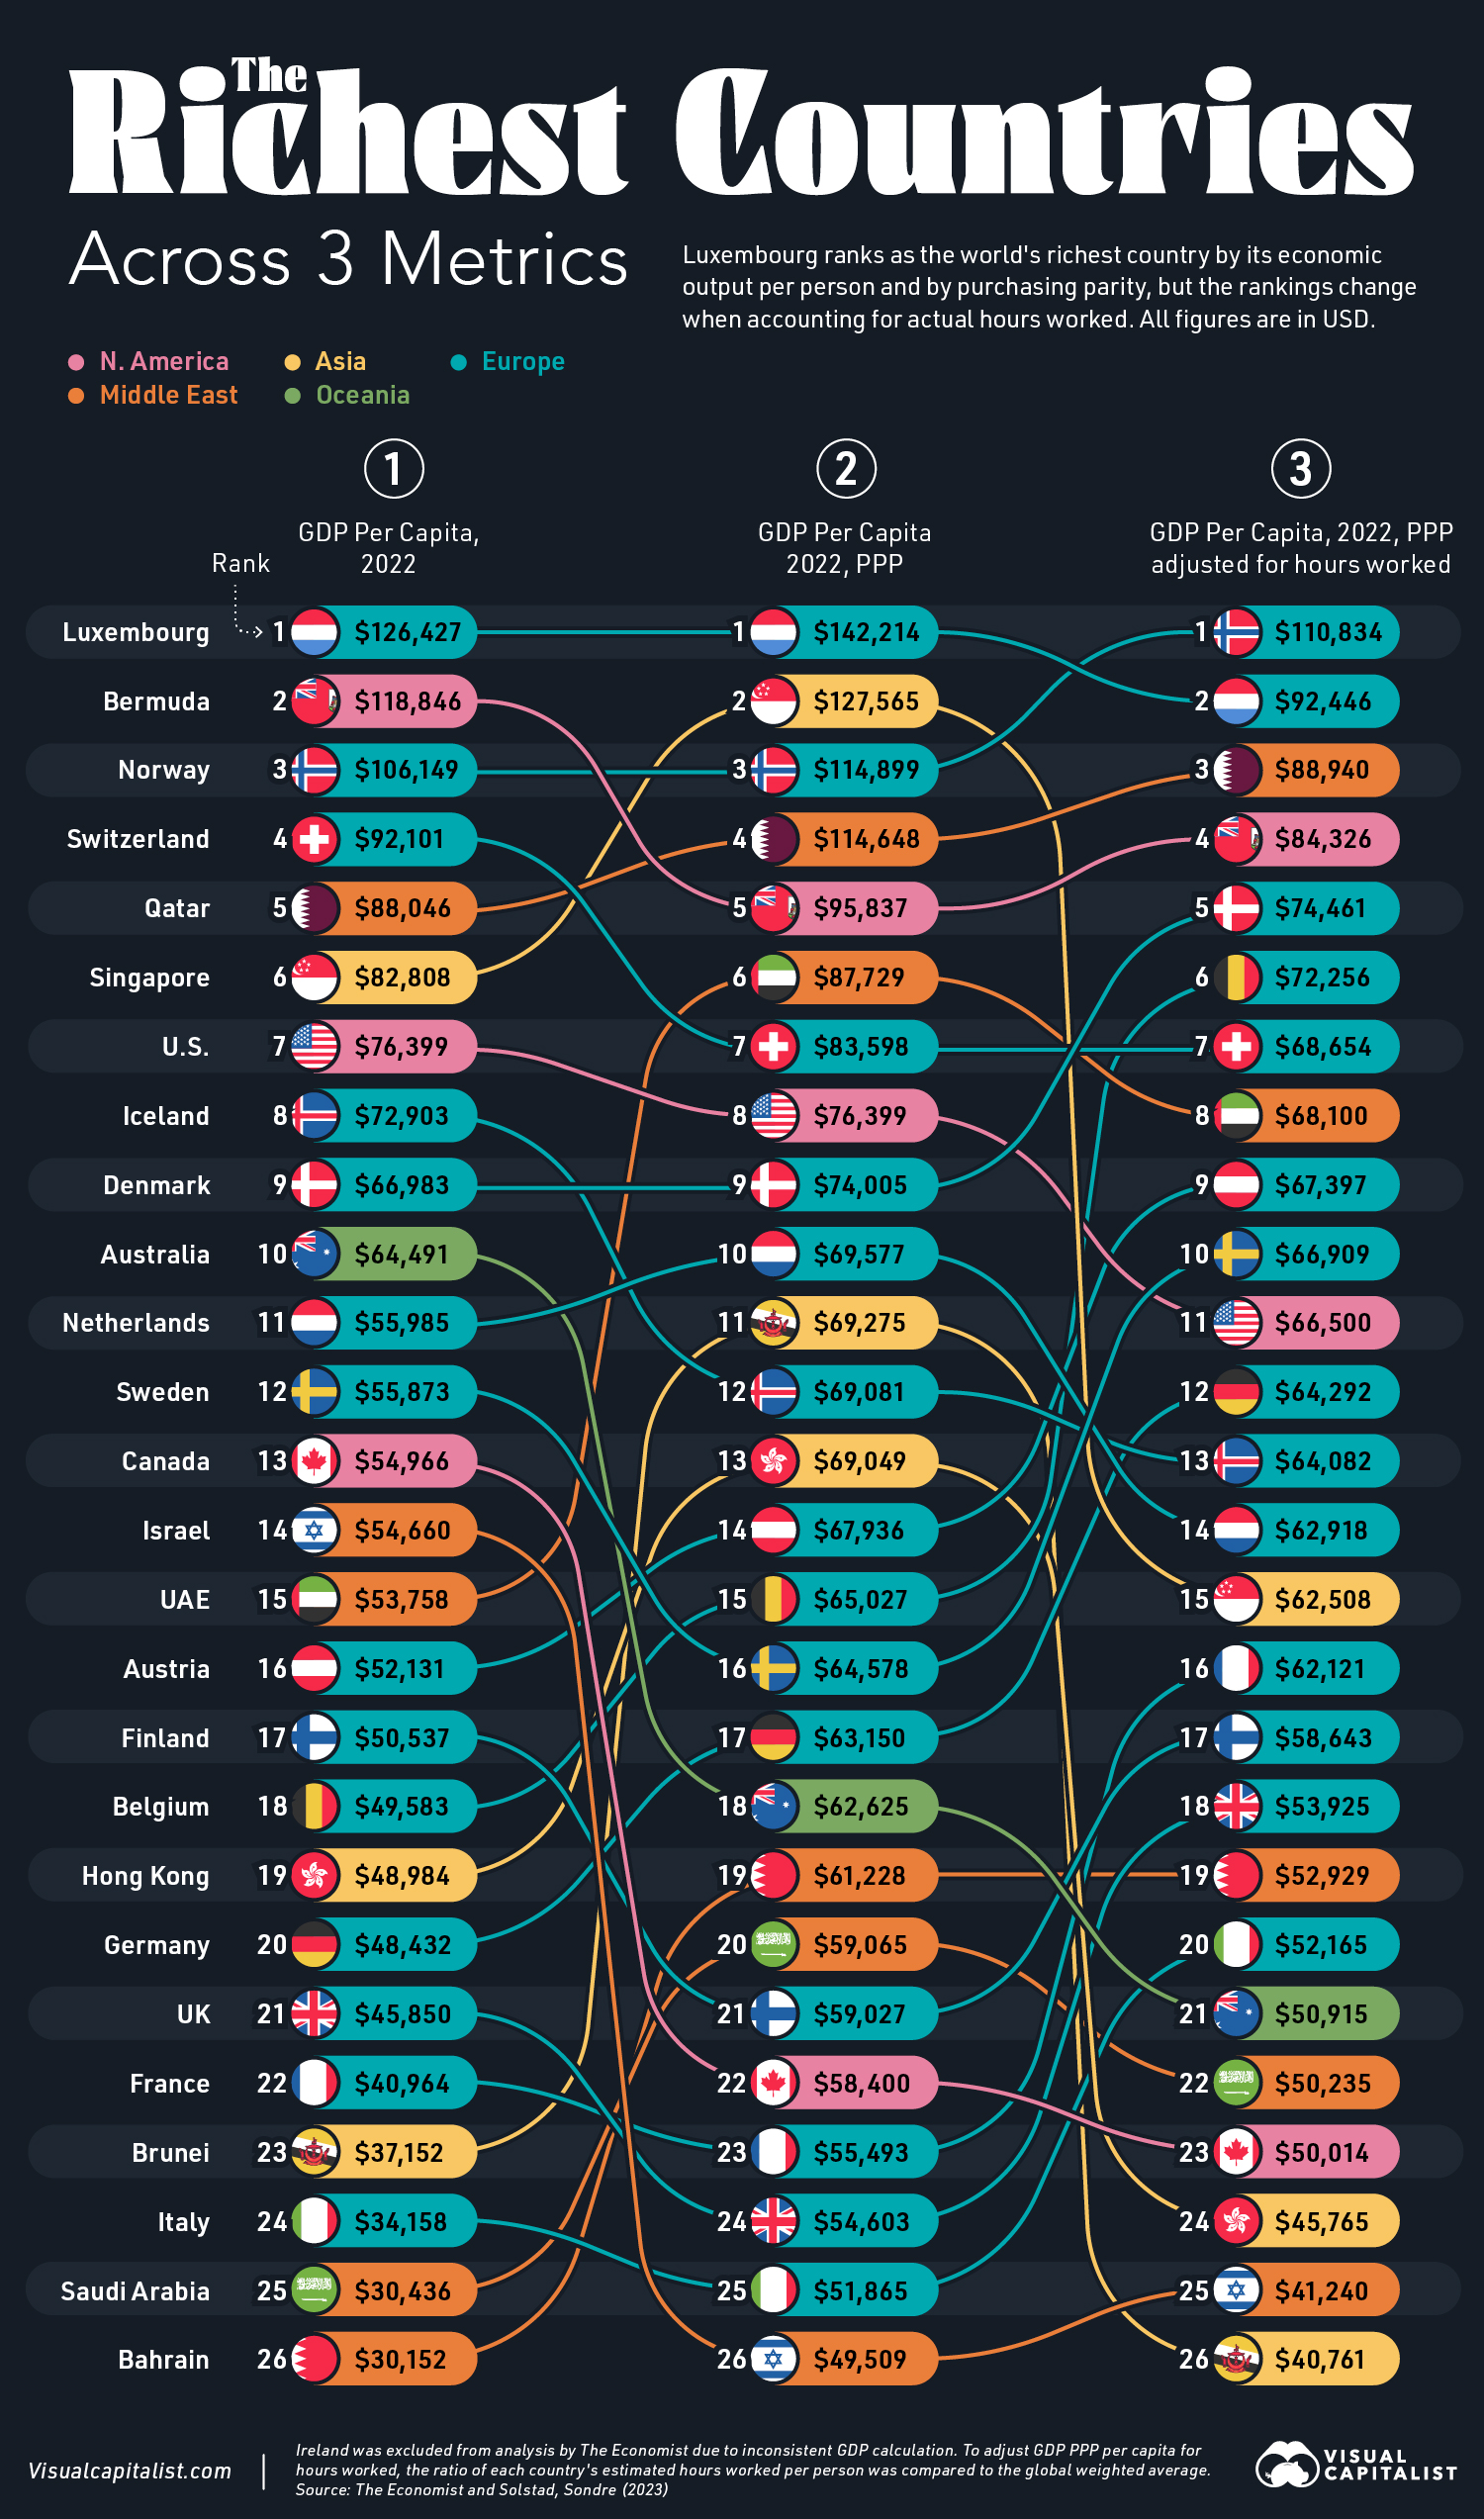 This graphic shows the world's richest countries based on three measures of GDP per capita.